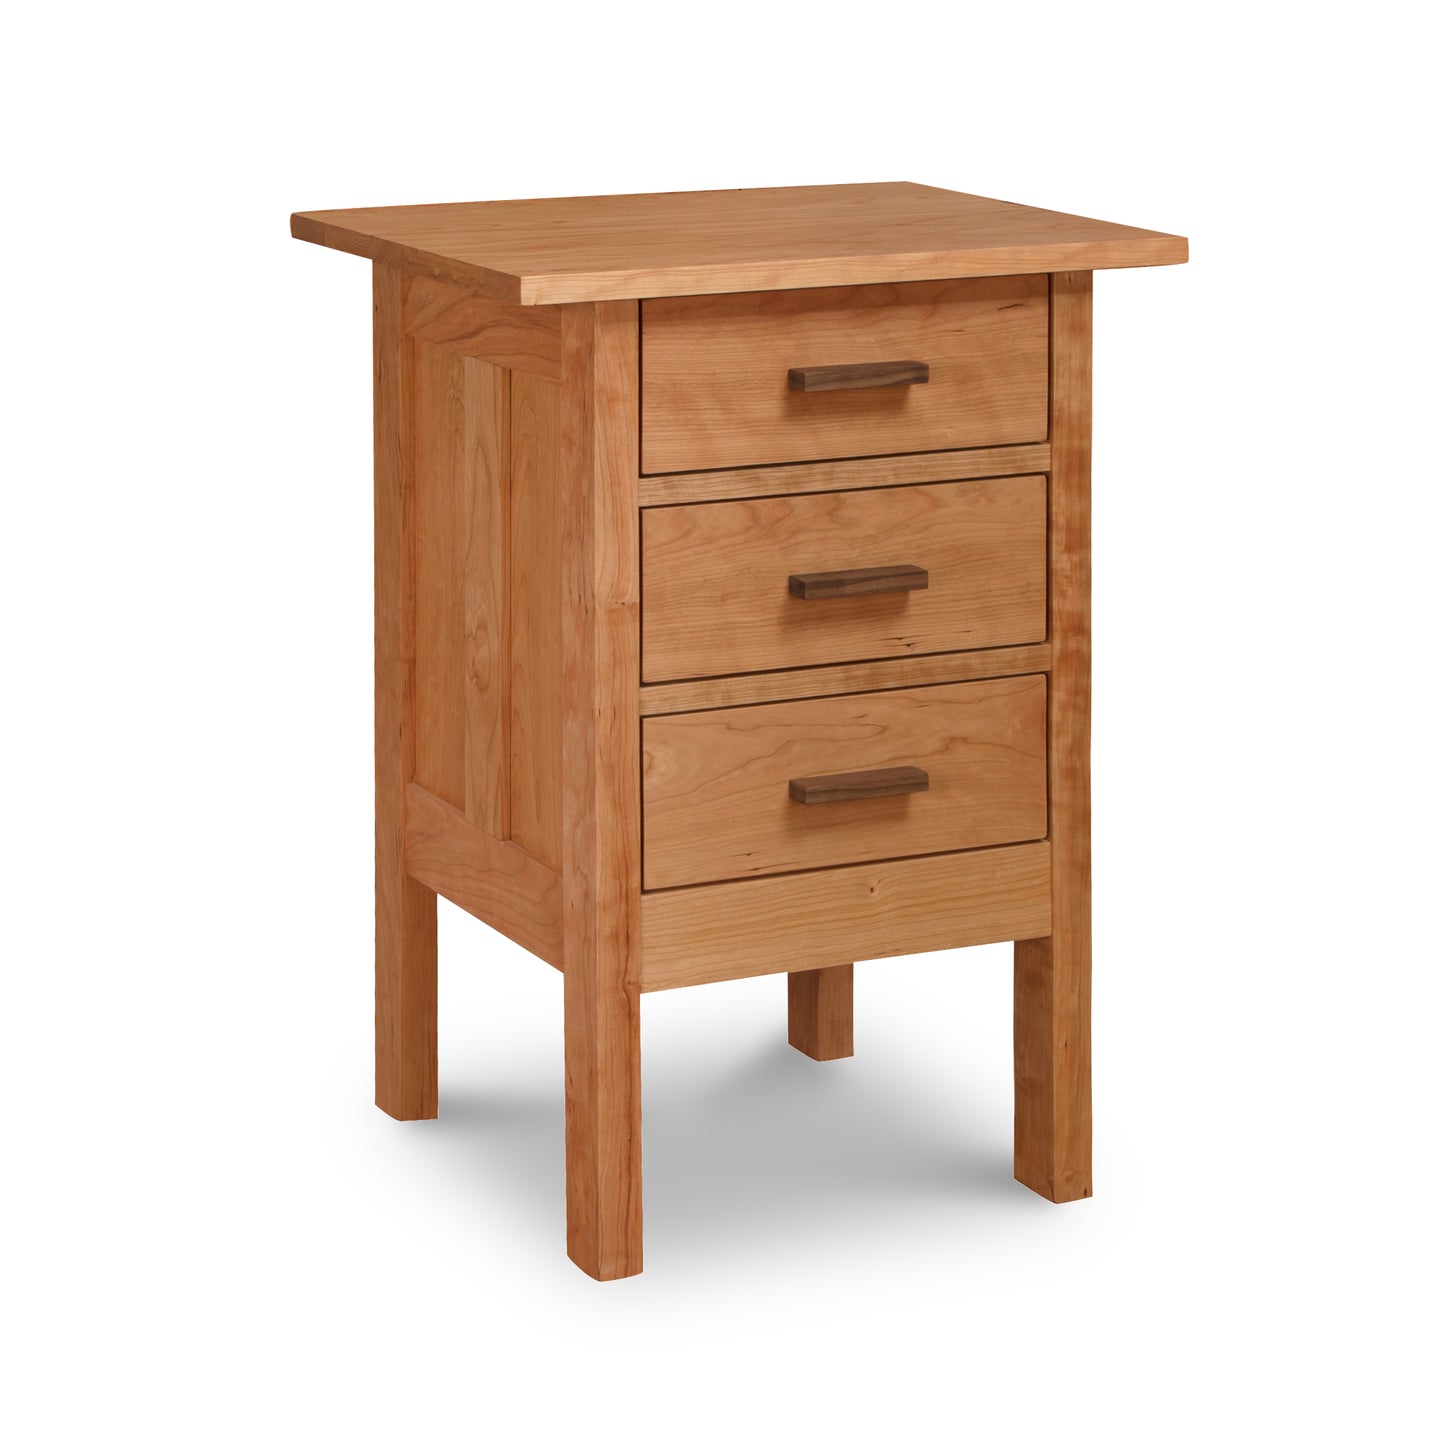 A Vermont Furniture Designs Modern Craftsman 3-Drawer Nightstand, perfect for a contemporary bedroom.